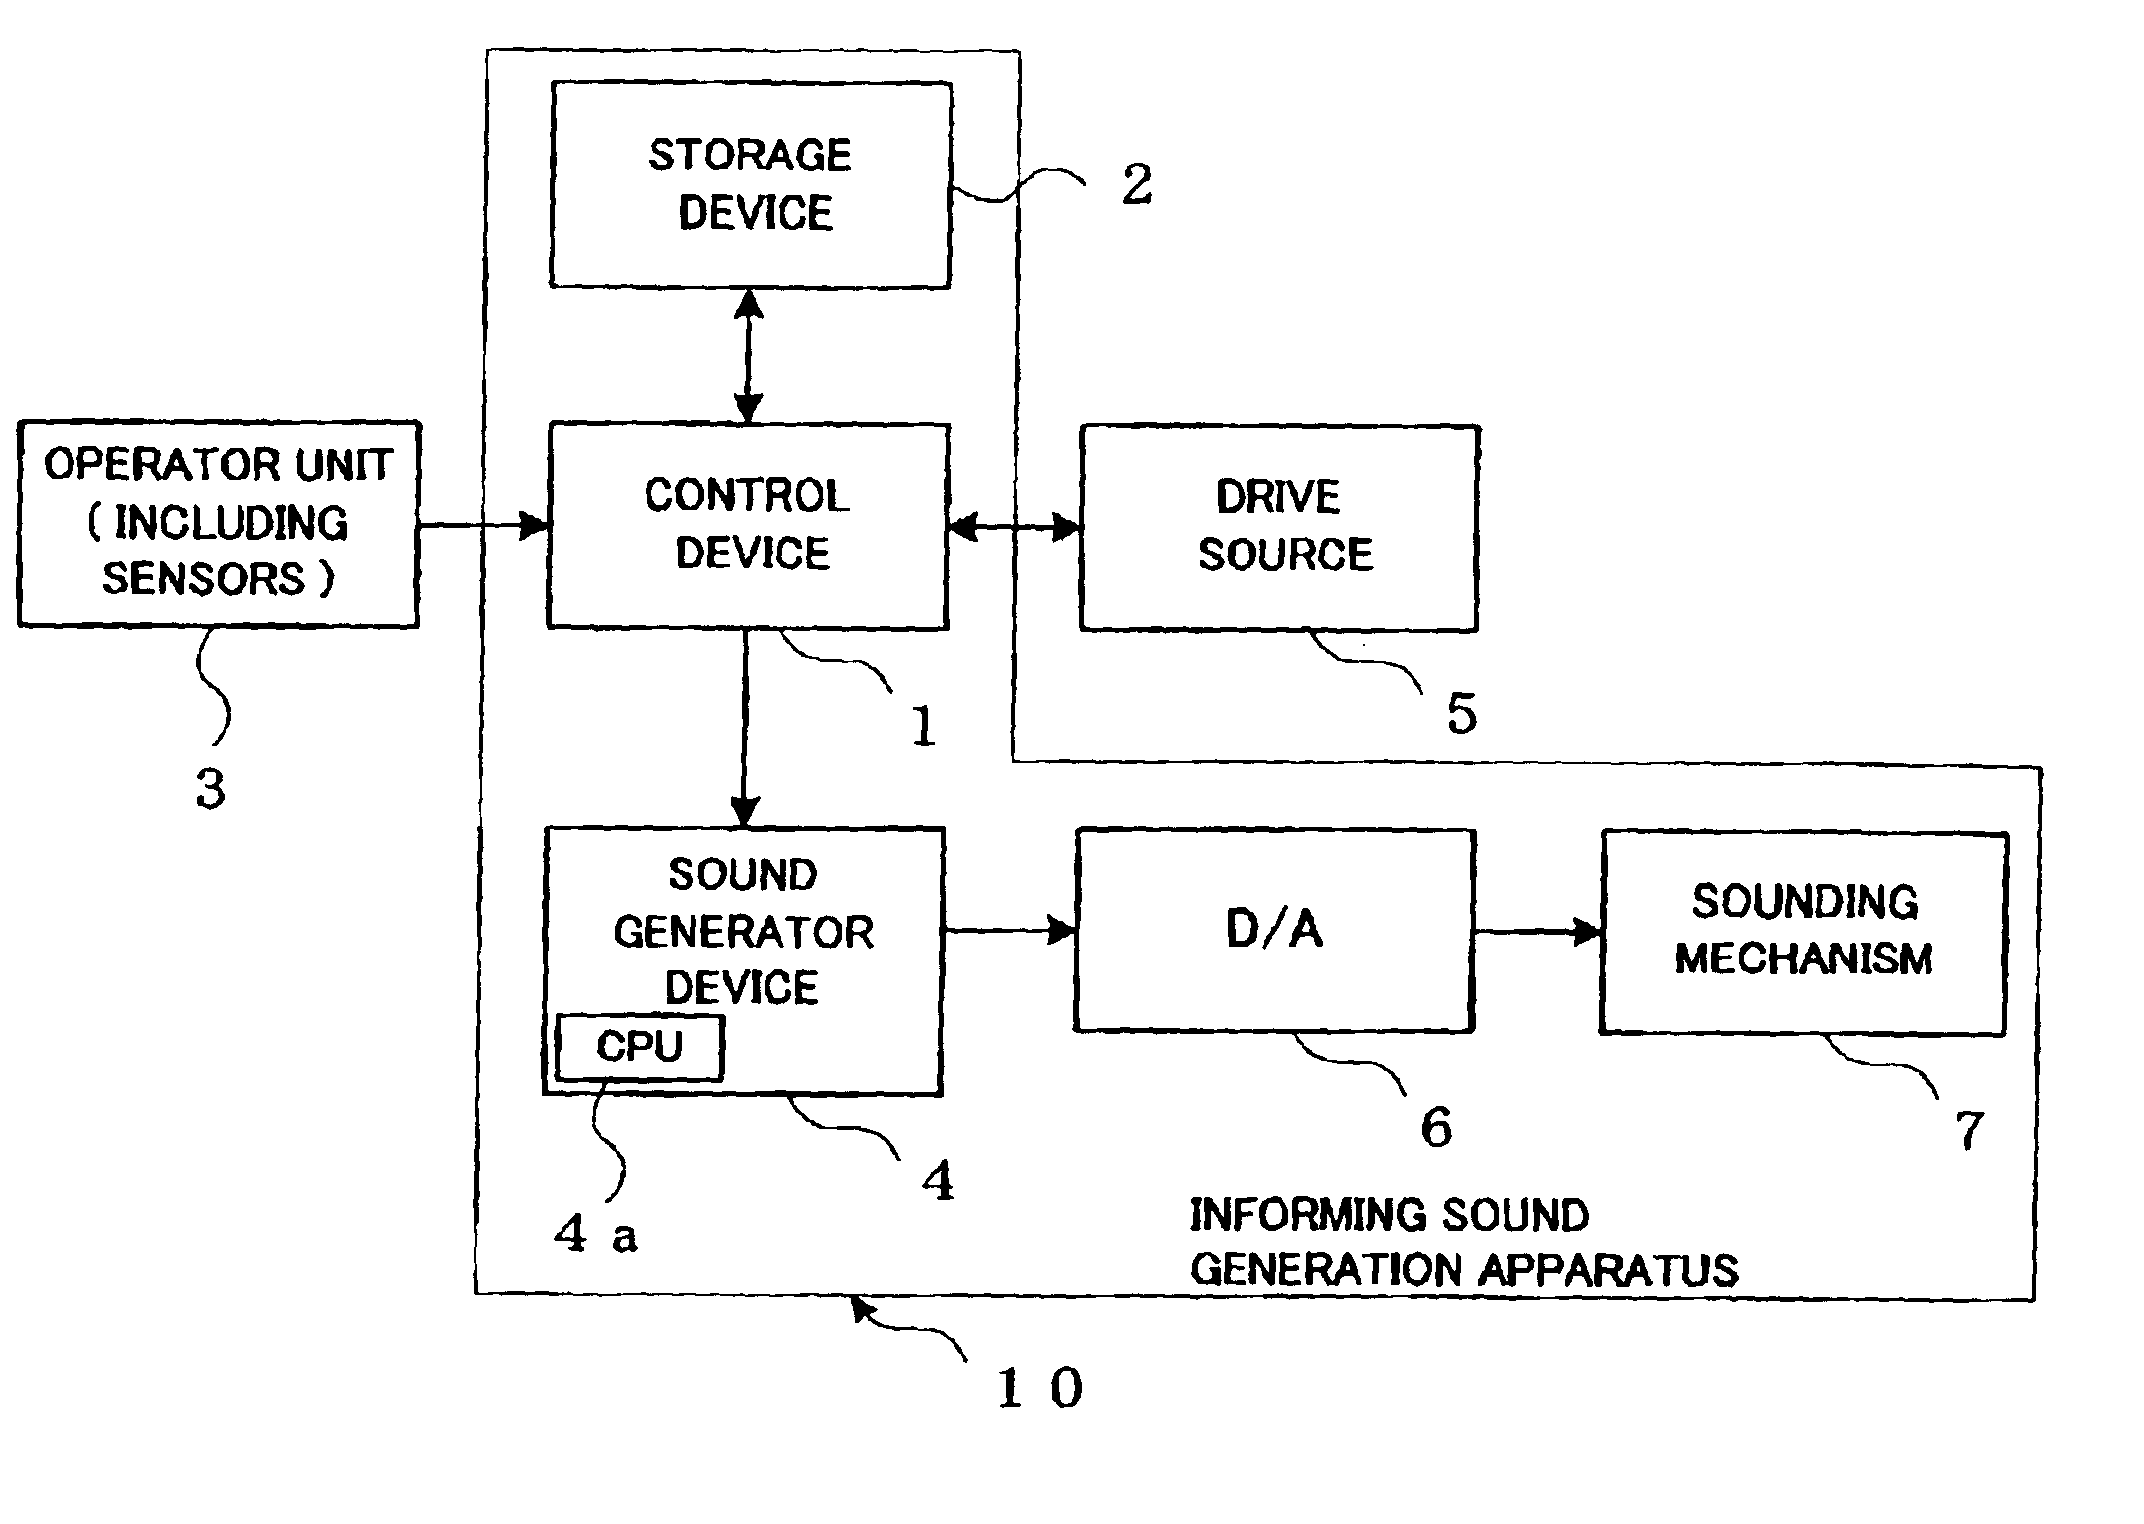 Informing sound generation method and apparatus for vehicle